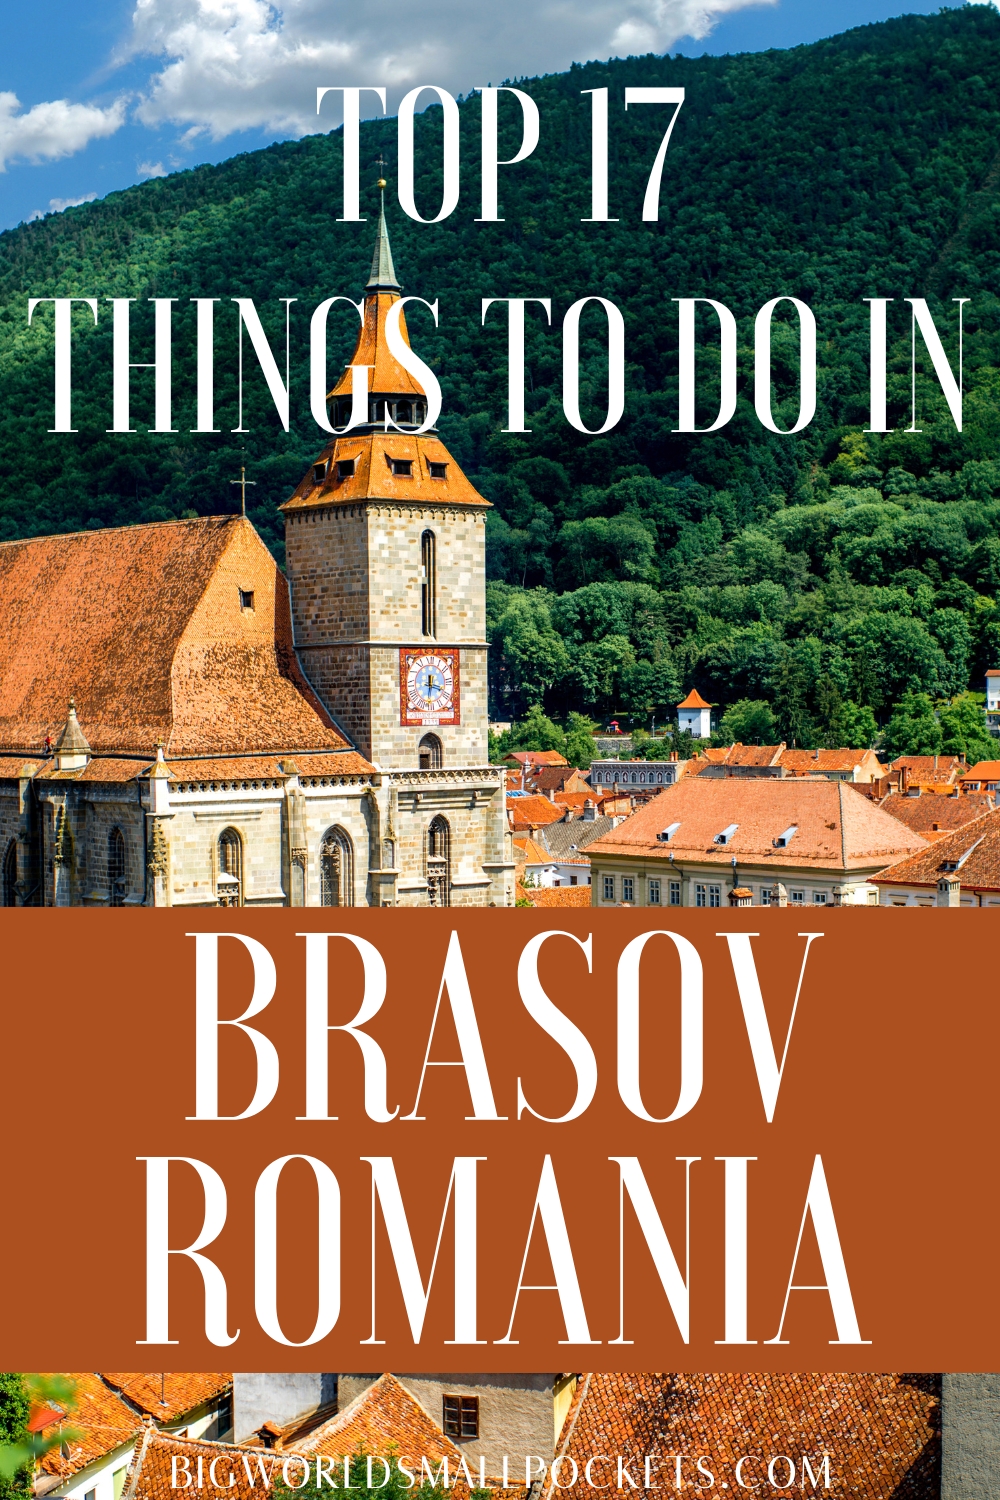 Top Things to Do in Brasov, Romania